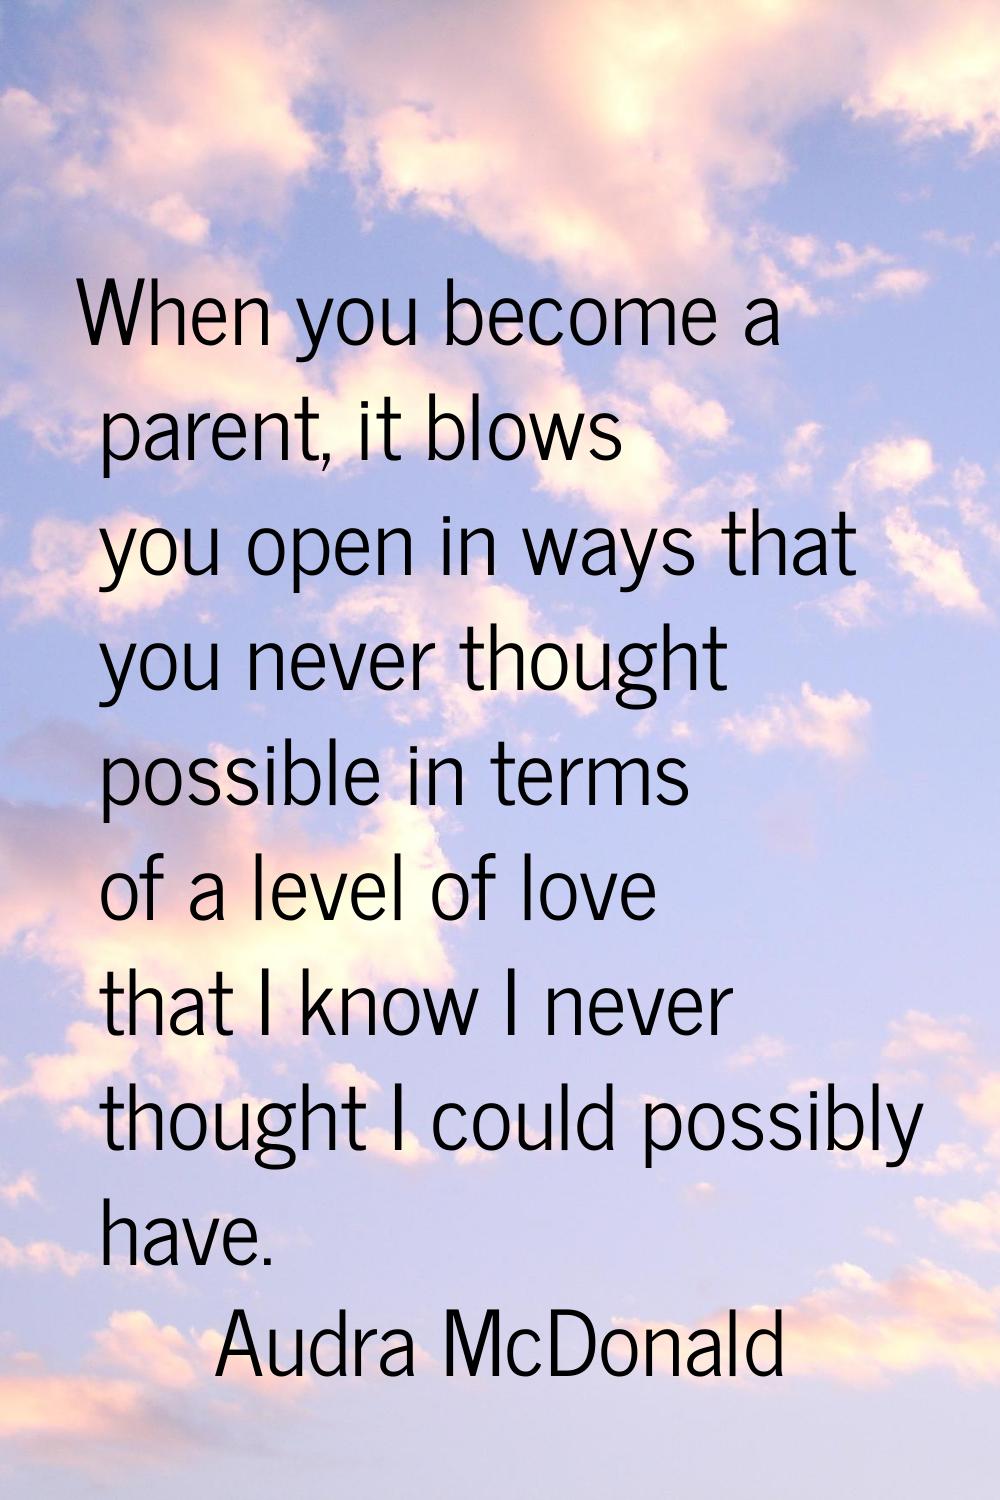 When you become a parent, it blows you open in ways that you never thought possible in terms of a l